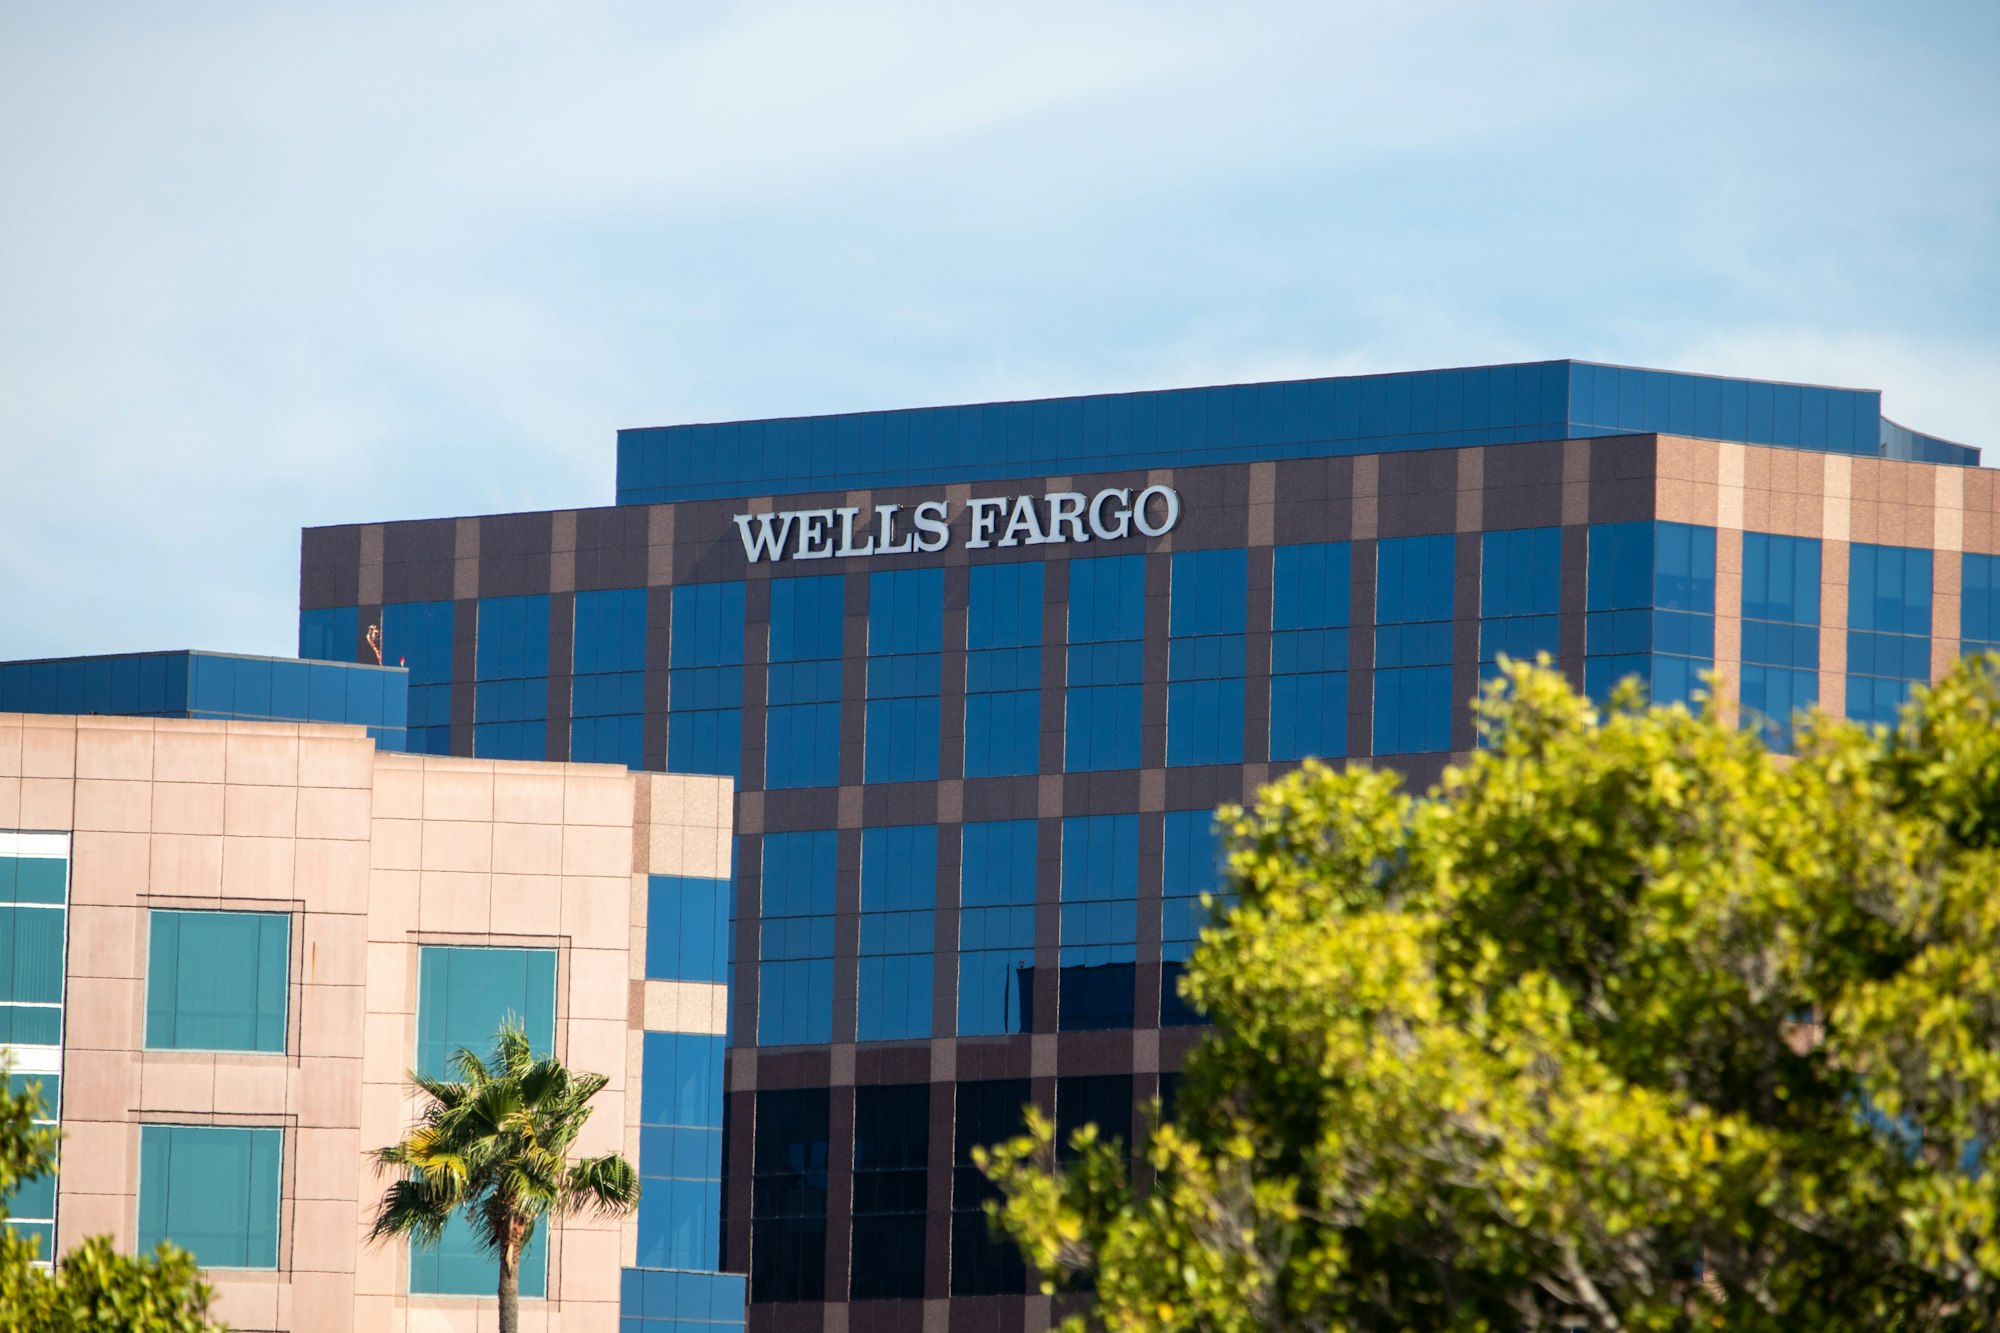 🏦Wells Fargo to pay $3.7 billion in CFPB settlement over consumer mistreatment allegations.